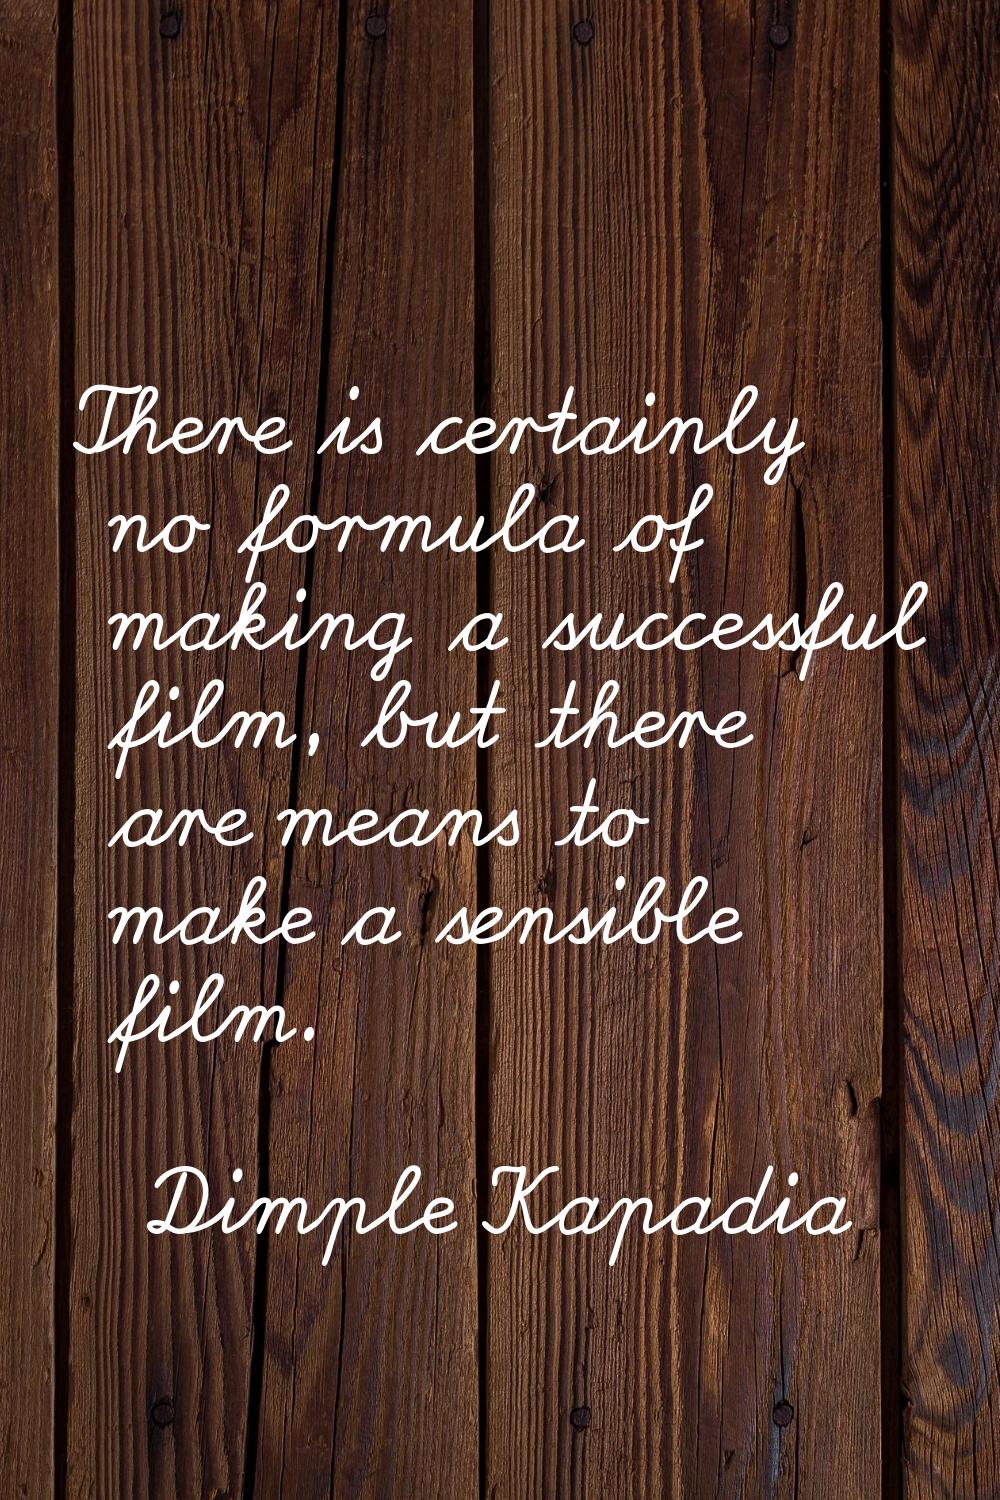 There is certainly no formula of making a successful film, but there are means to make a sensible f